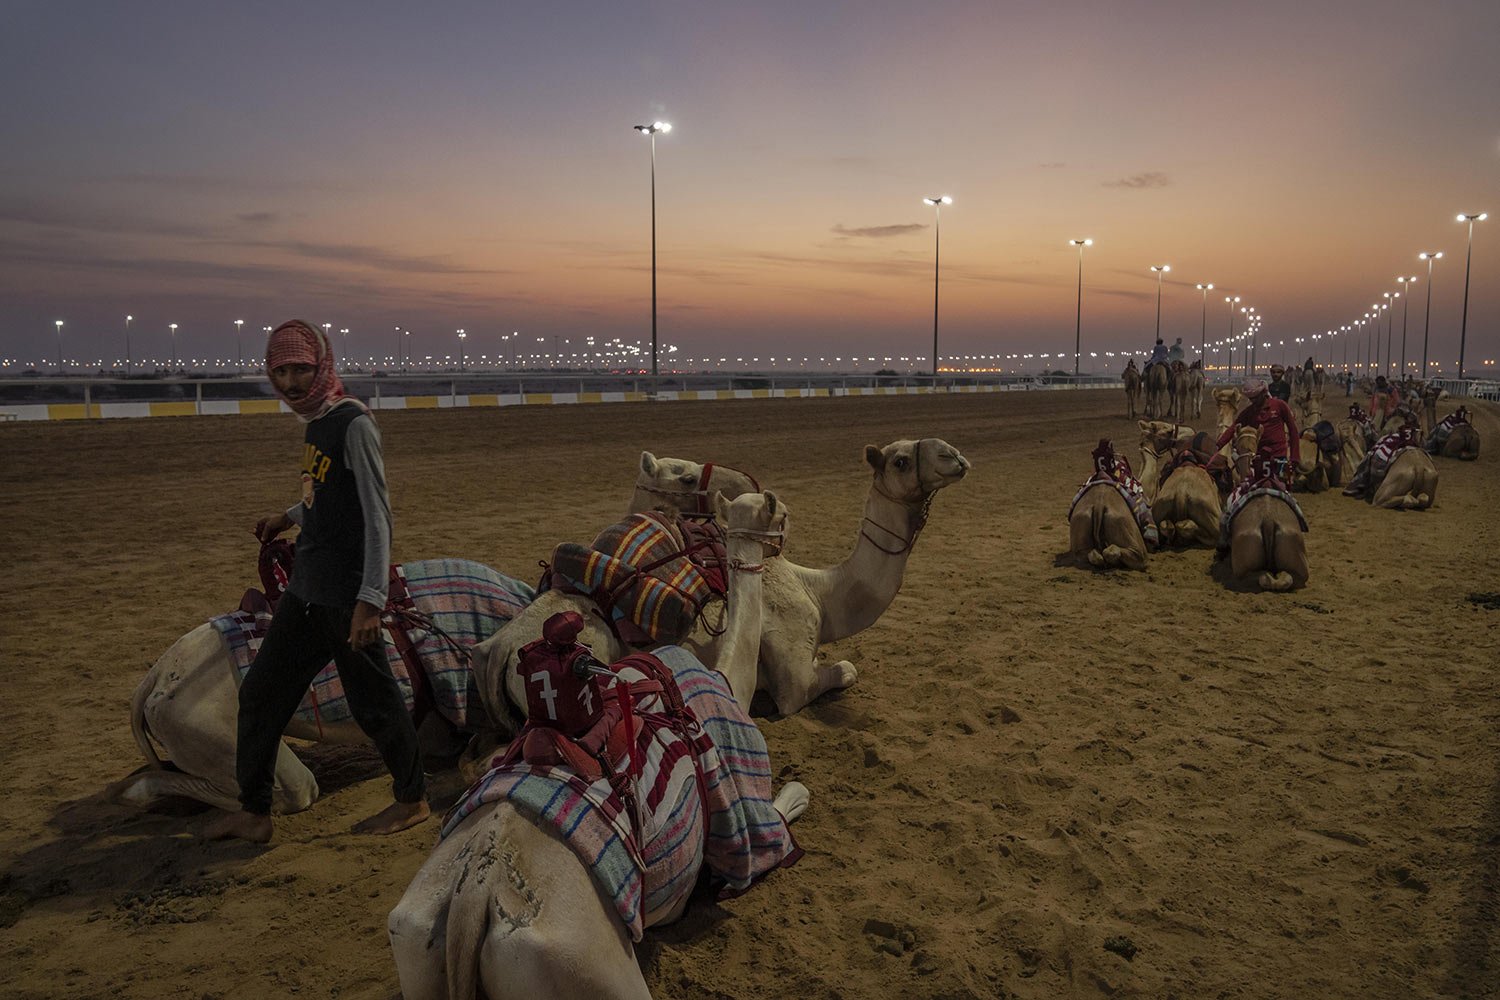  Trainers prepare their camels before the start of an exercise for an upcoming camel race, in Al Shahaniah, Qatar, Tuesday, Oct. 18, 2022. Camel racing is a staple in Qatar's culture and heritage. (AP Photo/Nariman El-Mofty) 